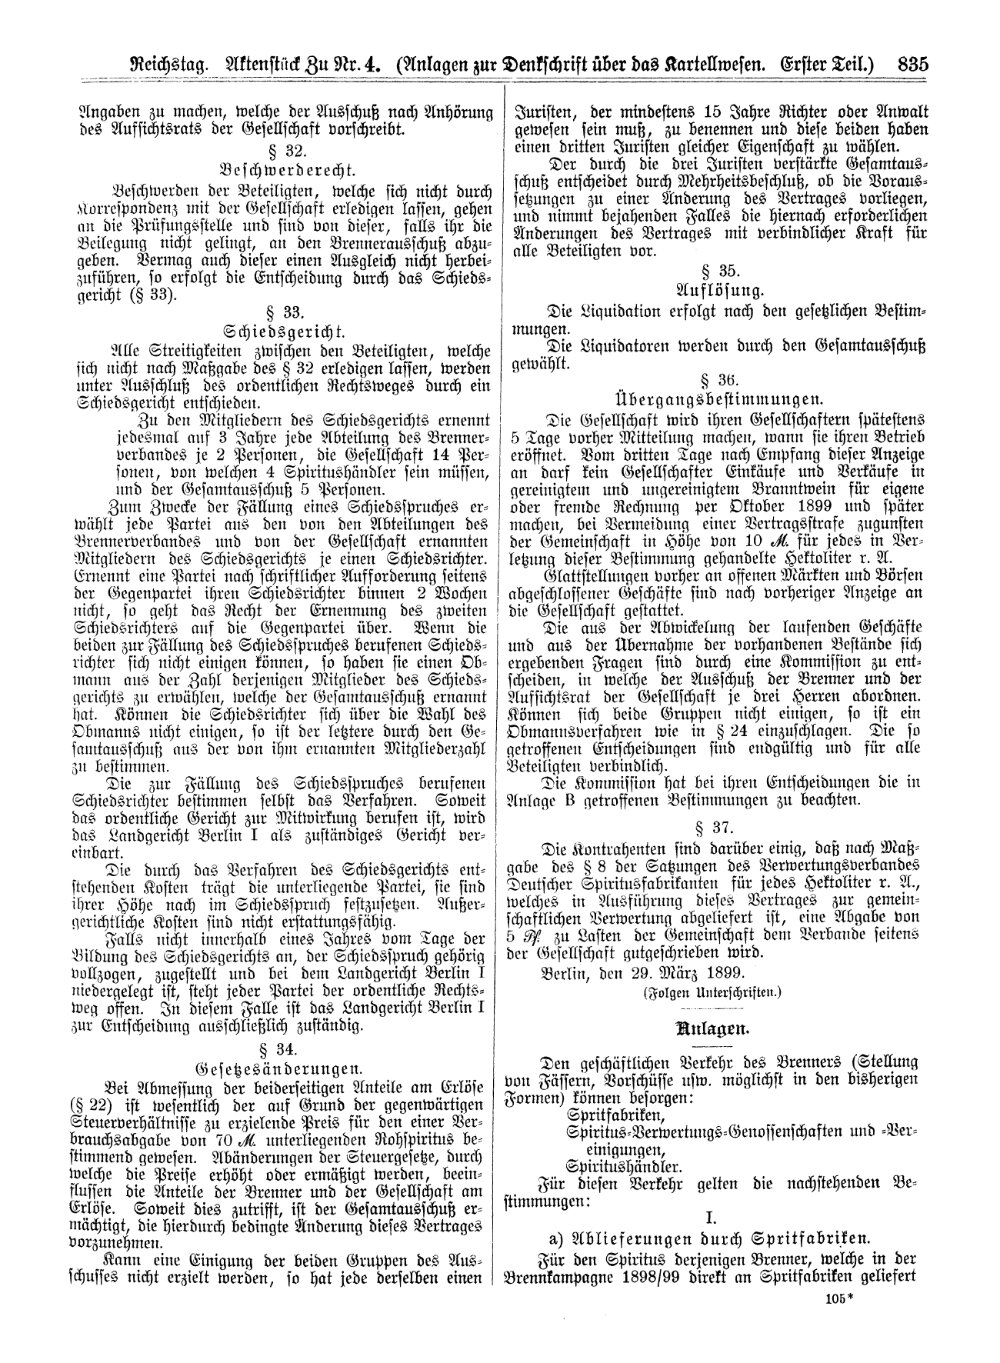 Scan of page 835